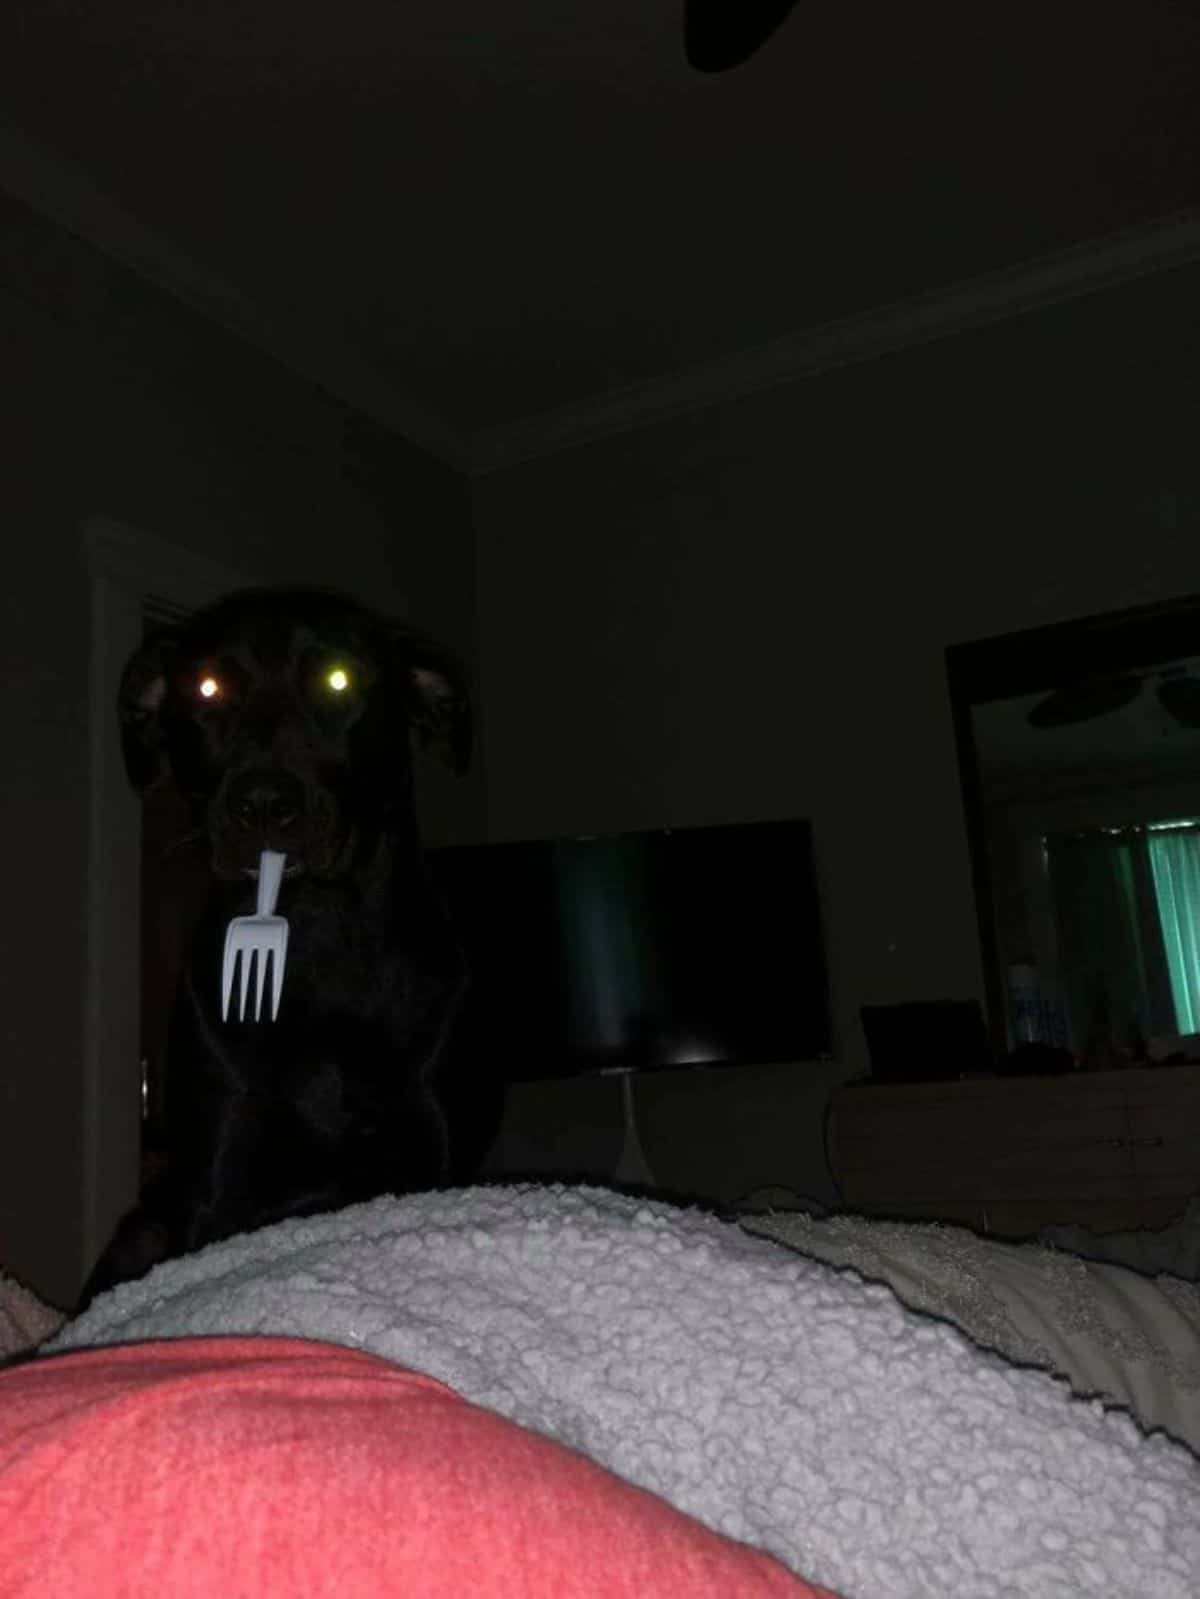 black dog standing in the darkness with eyes glowing holding a white plastic fork in front of a bed